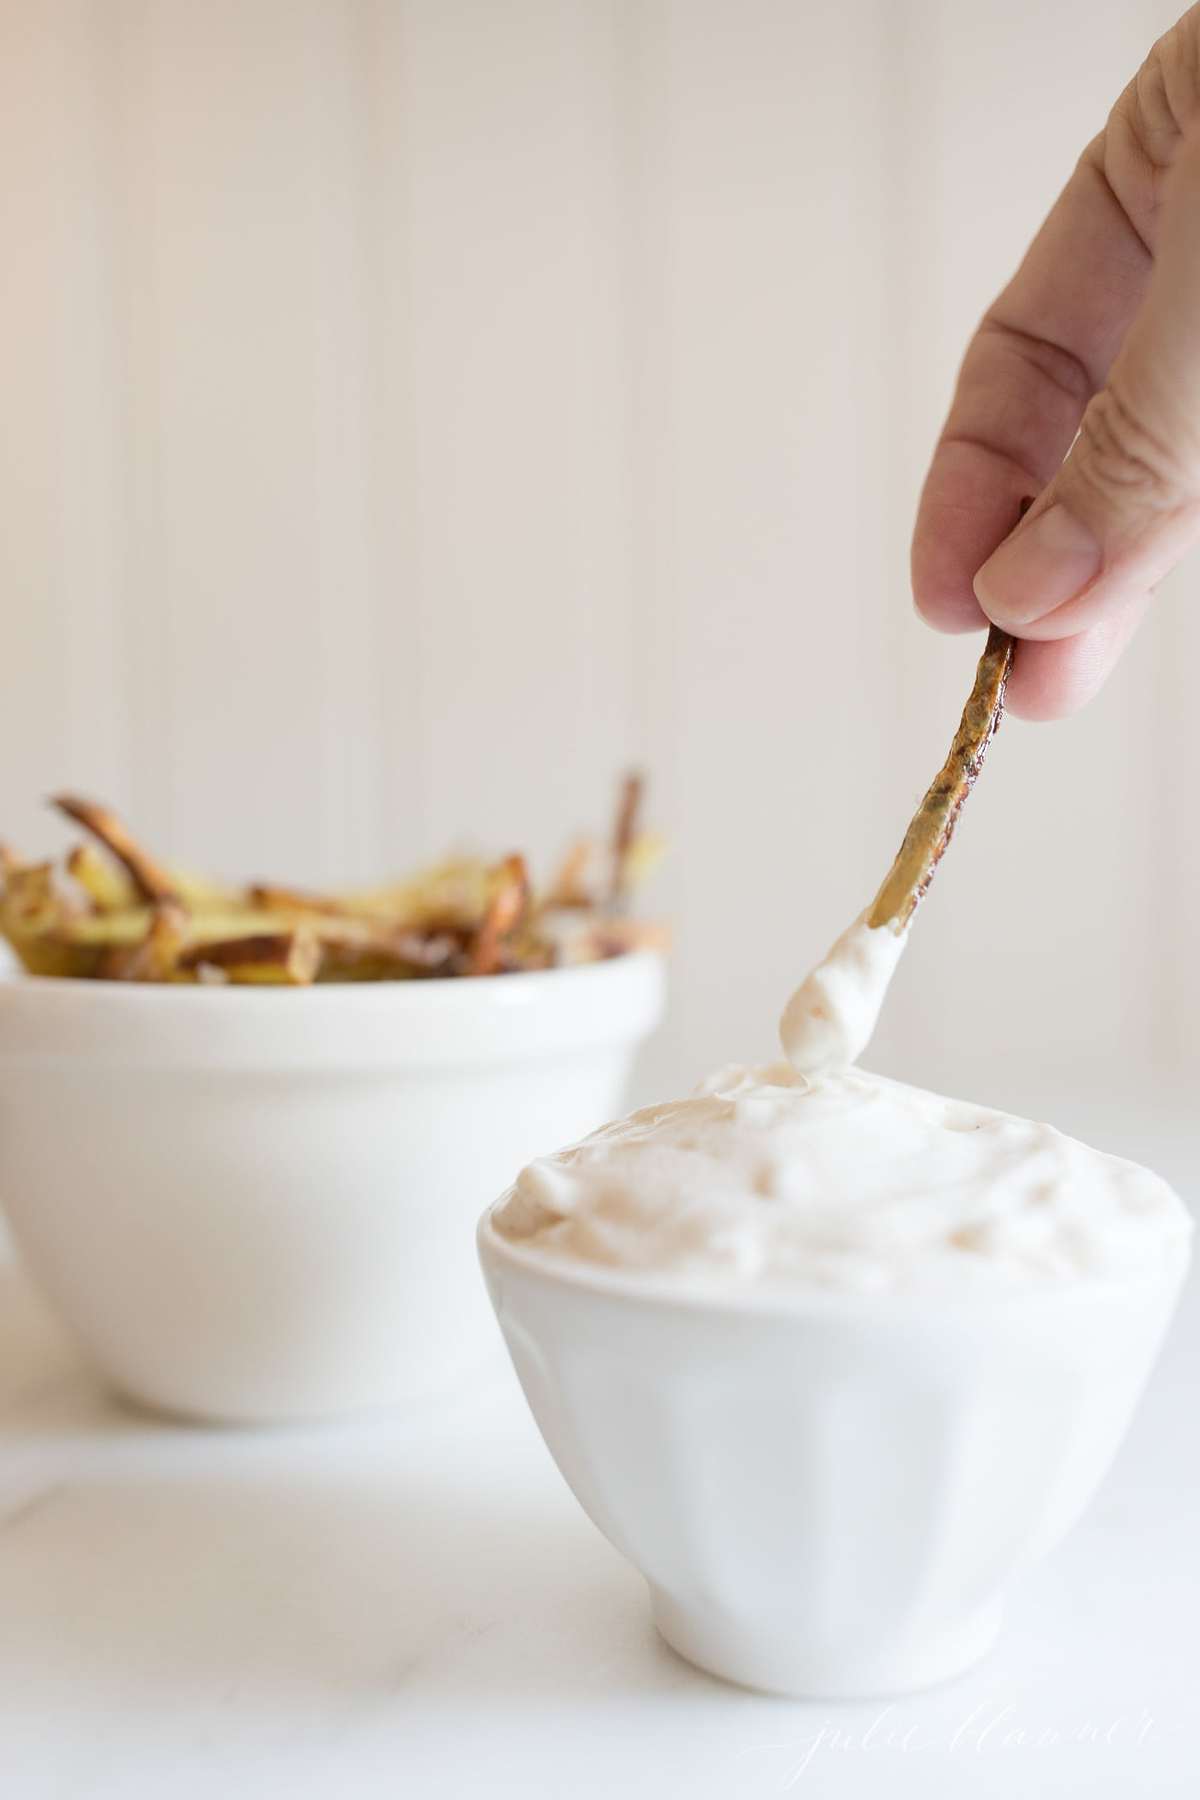 truffle mayo in a white bowl with a bowl of fries in the background, hand reaching in to dip with a single fry